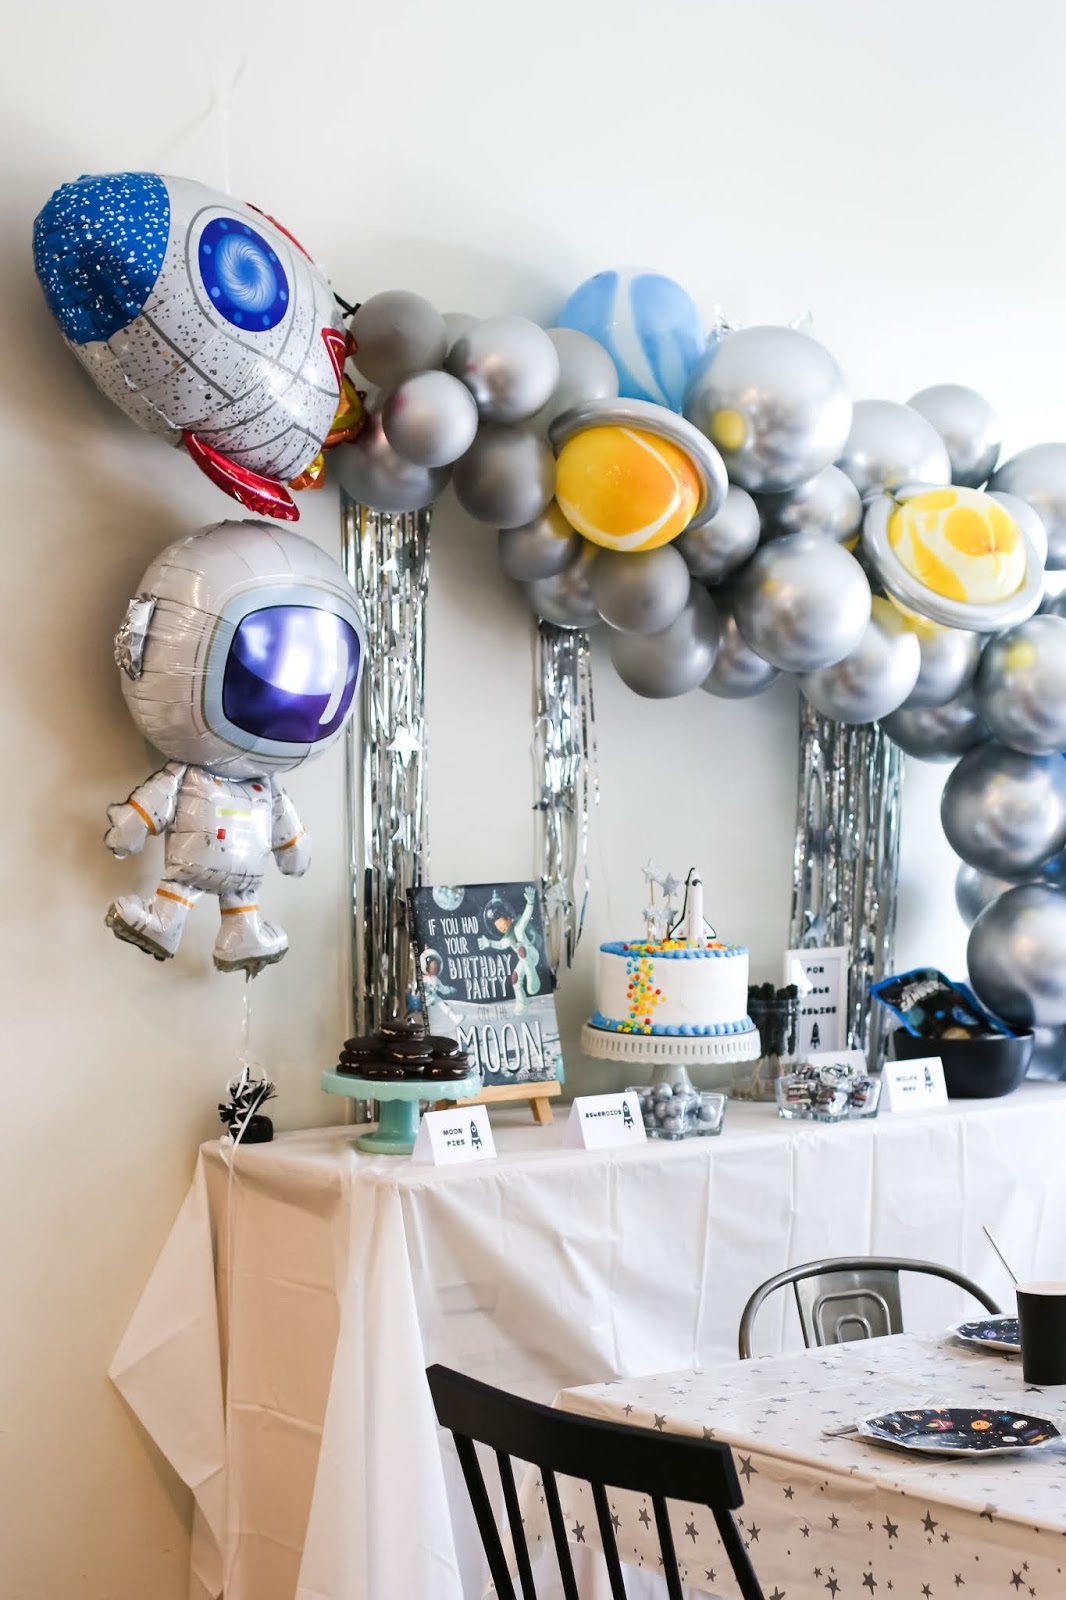 Space ONE high chair banner for 1st Astronaut birthday or I love you to the Moon and back themed party